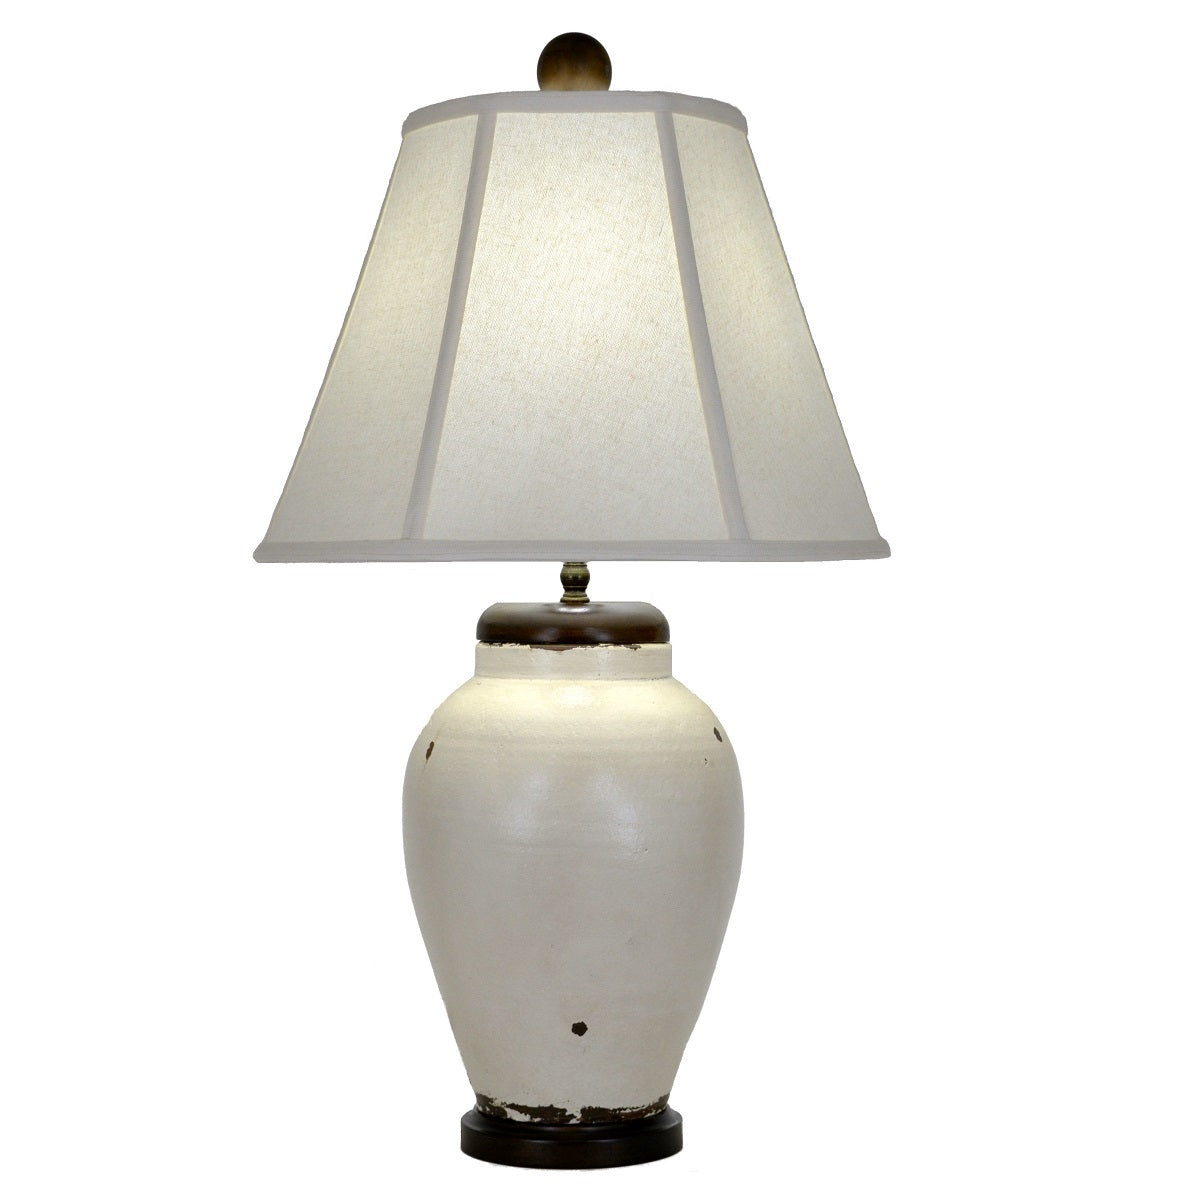 Oliver White Pottery Table Lamp - Lillian Home 